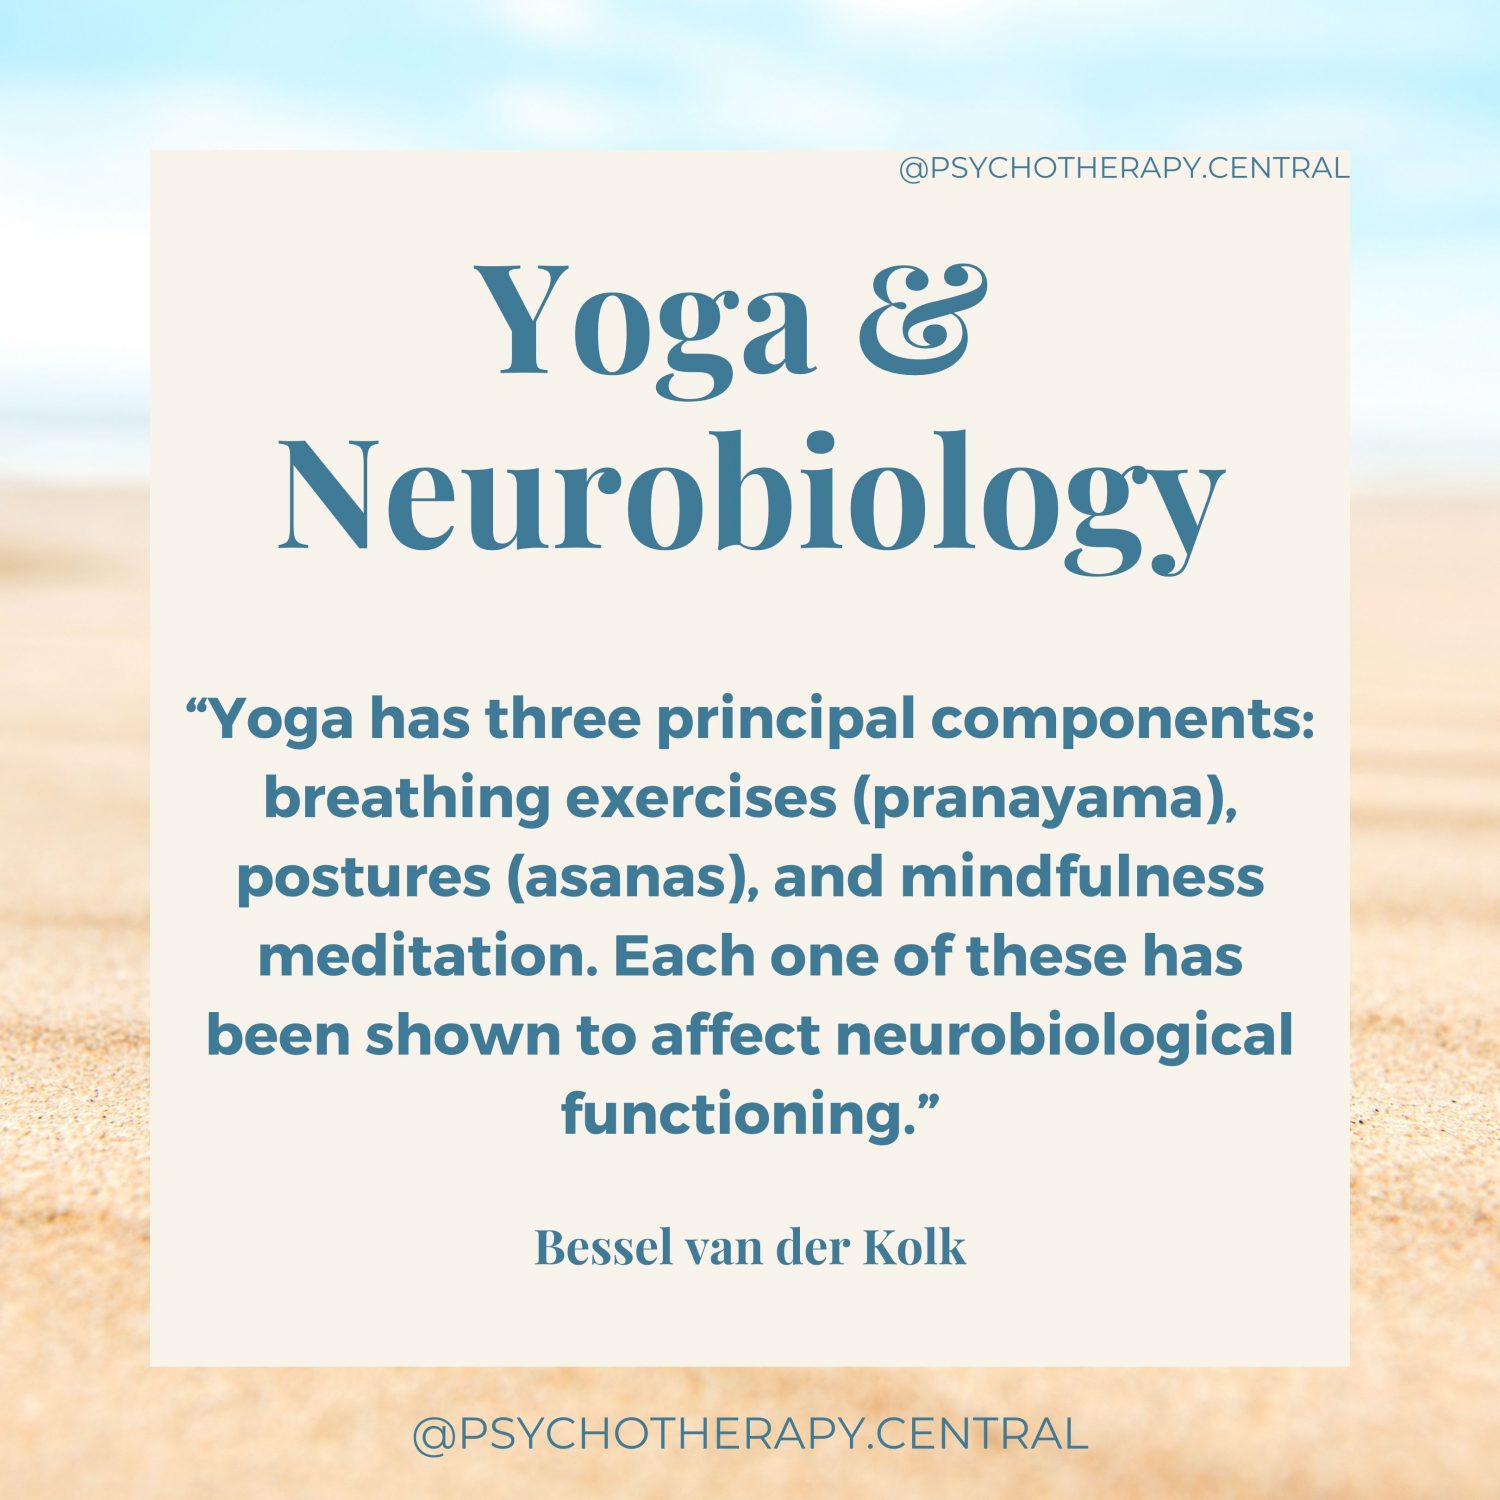 “Yoga has three principal components: breathing exercises (pranayama), postures (asanas), and mindfulness meditation. Each 1 of these has been shown to affect neurobiological functioning.” Bessel van der Kolk